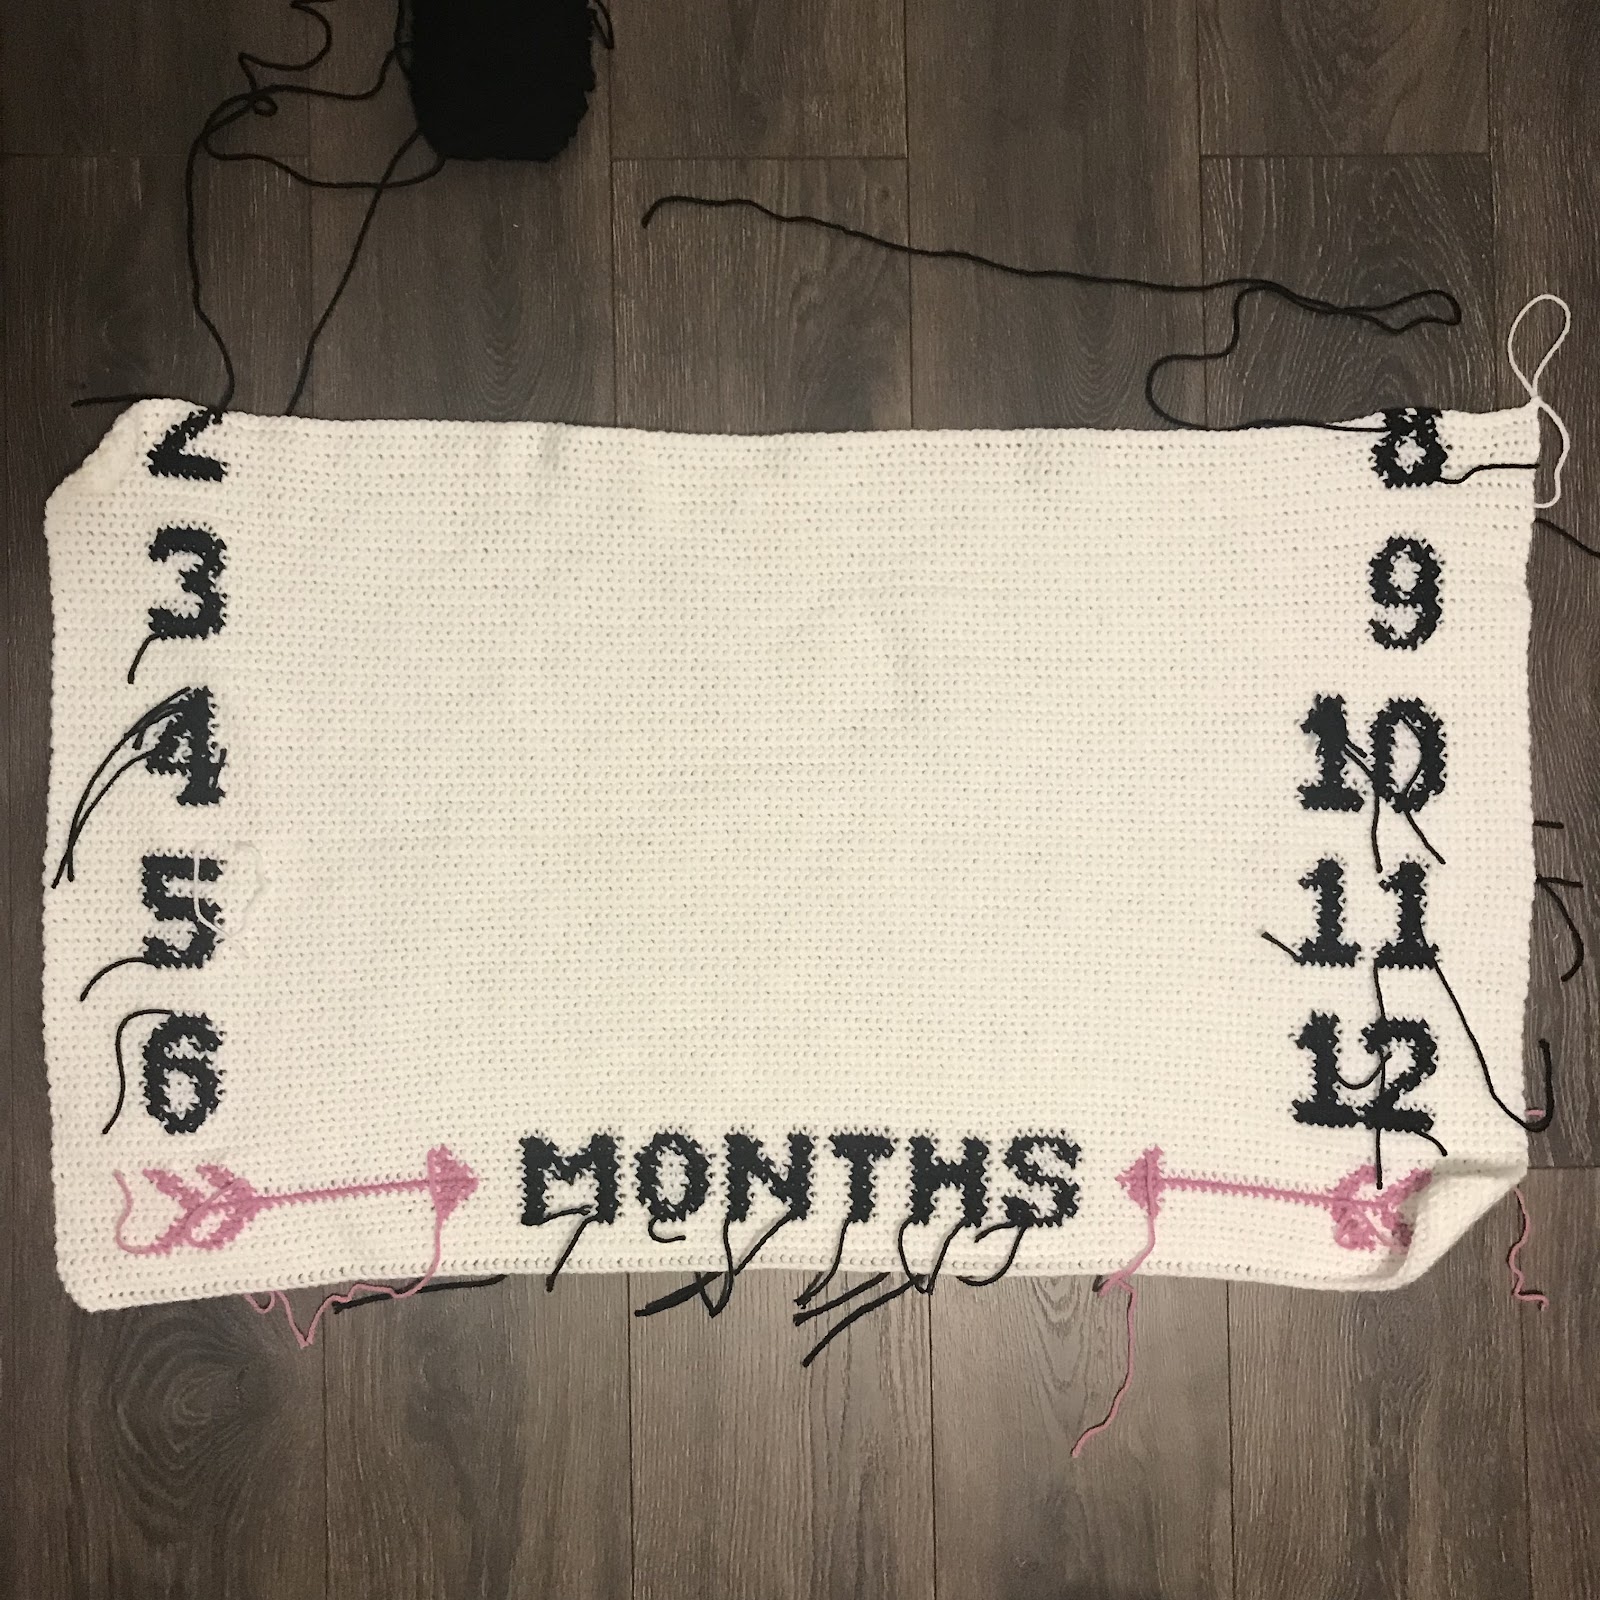 Square crochet graph baby growth blanket with months for baby's first year